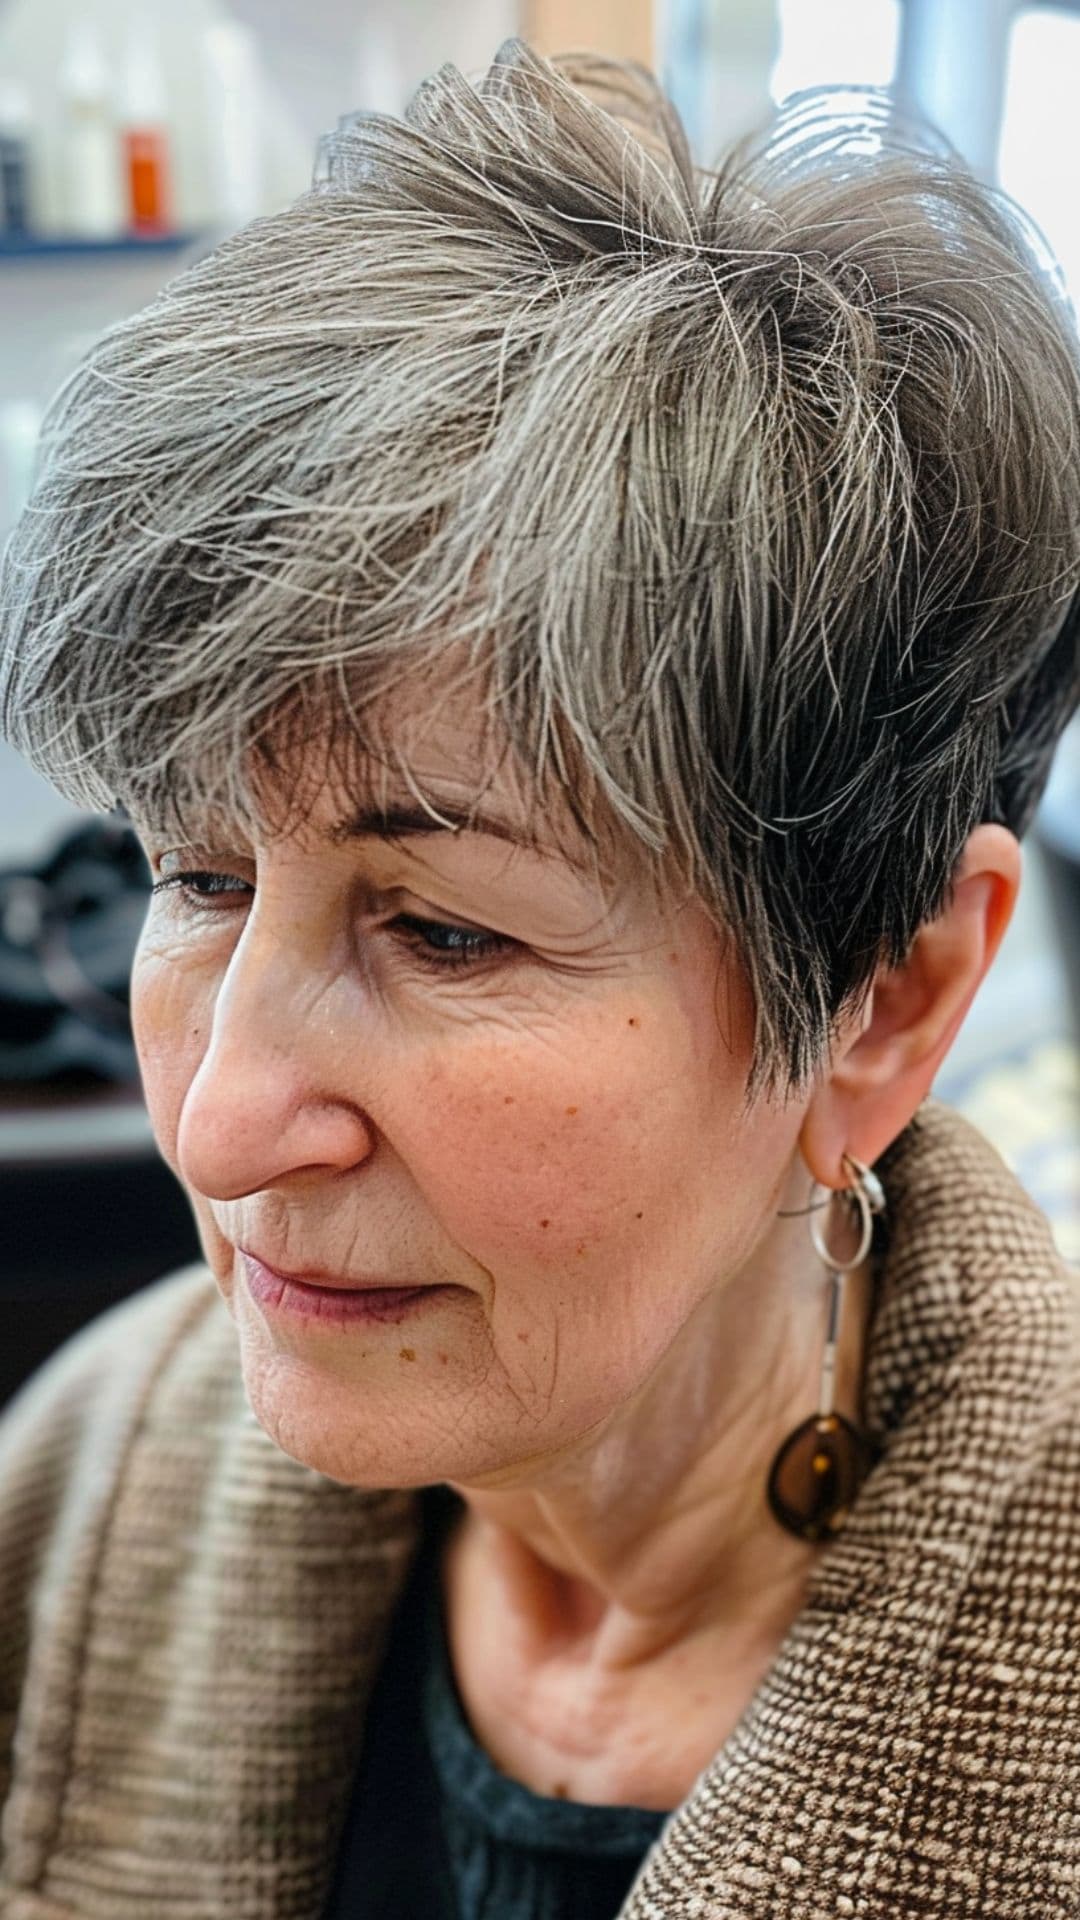 An old woman modelling a choppy pixie with long bangs.